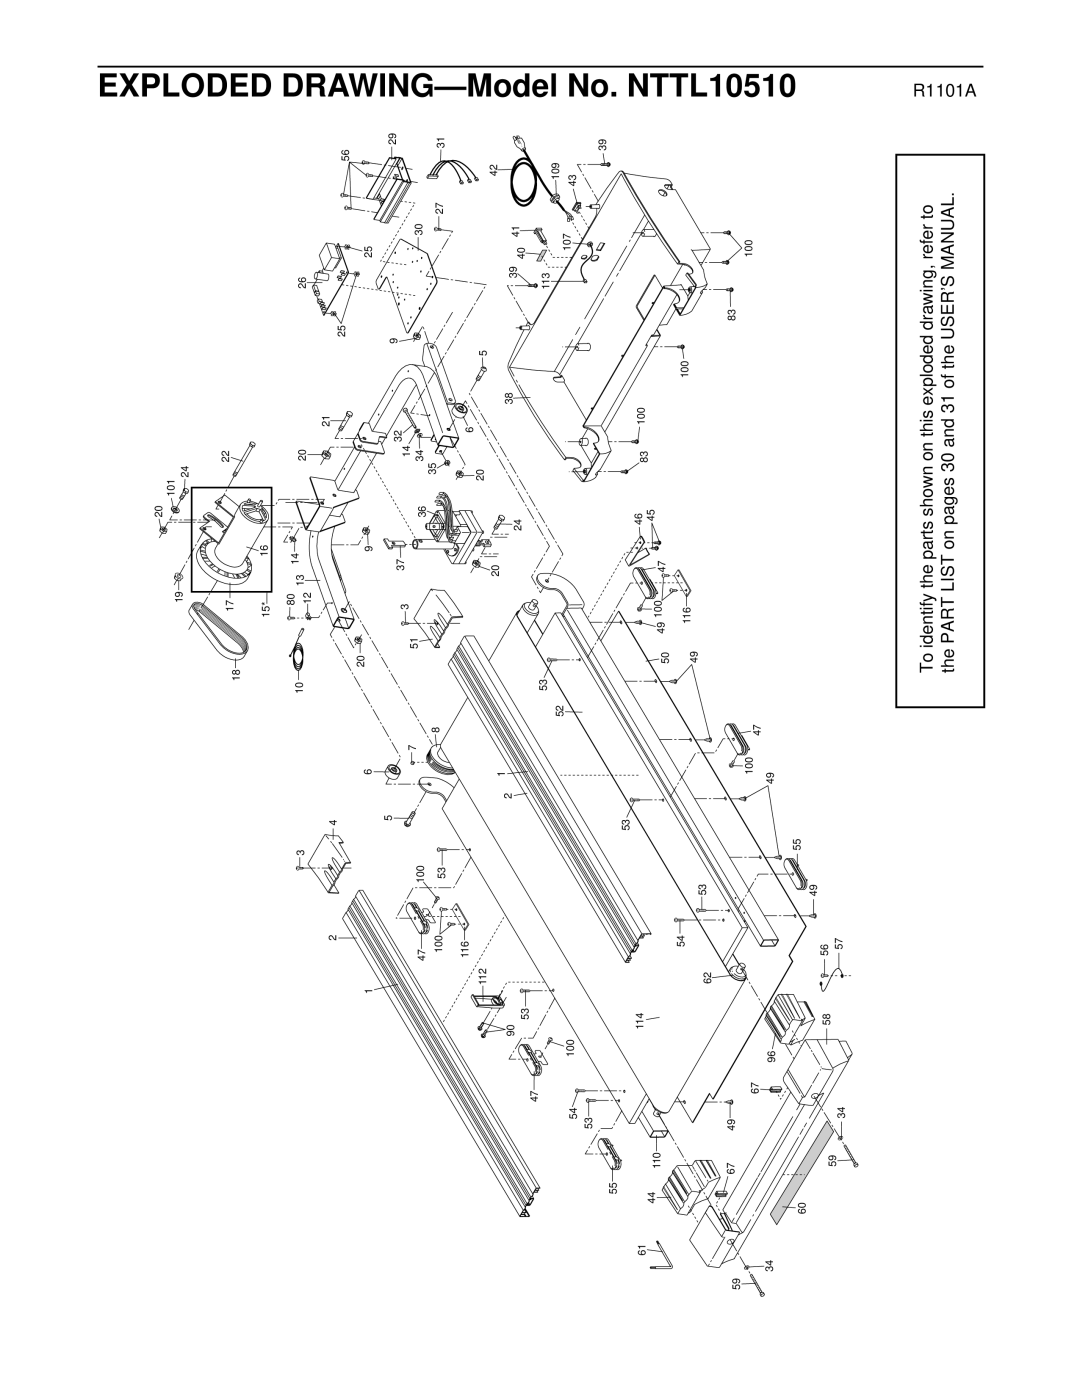 NordicTrack user manual Exploded, DRAWING-Model No. NTTL10510 